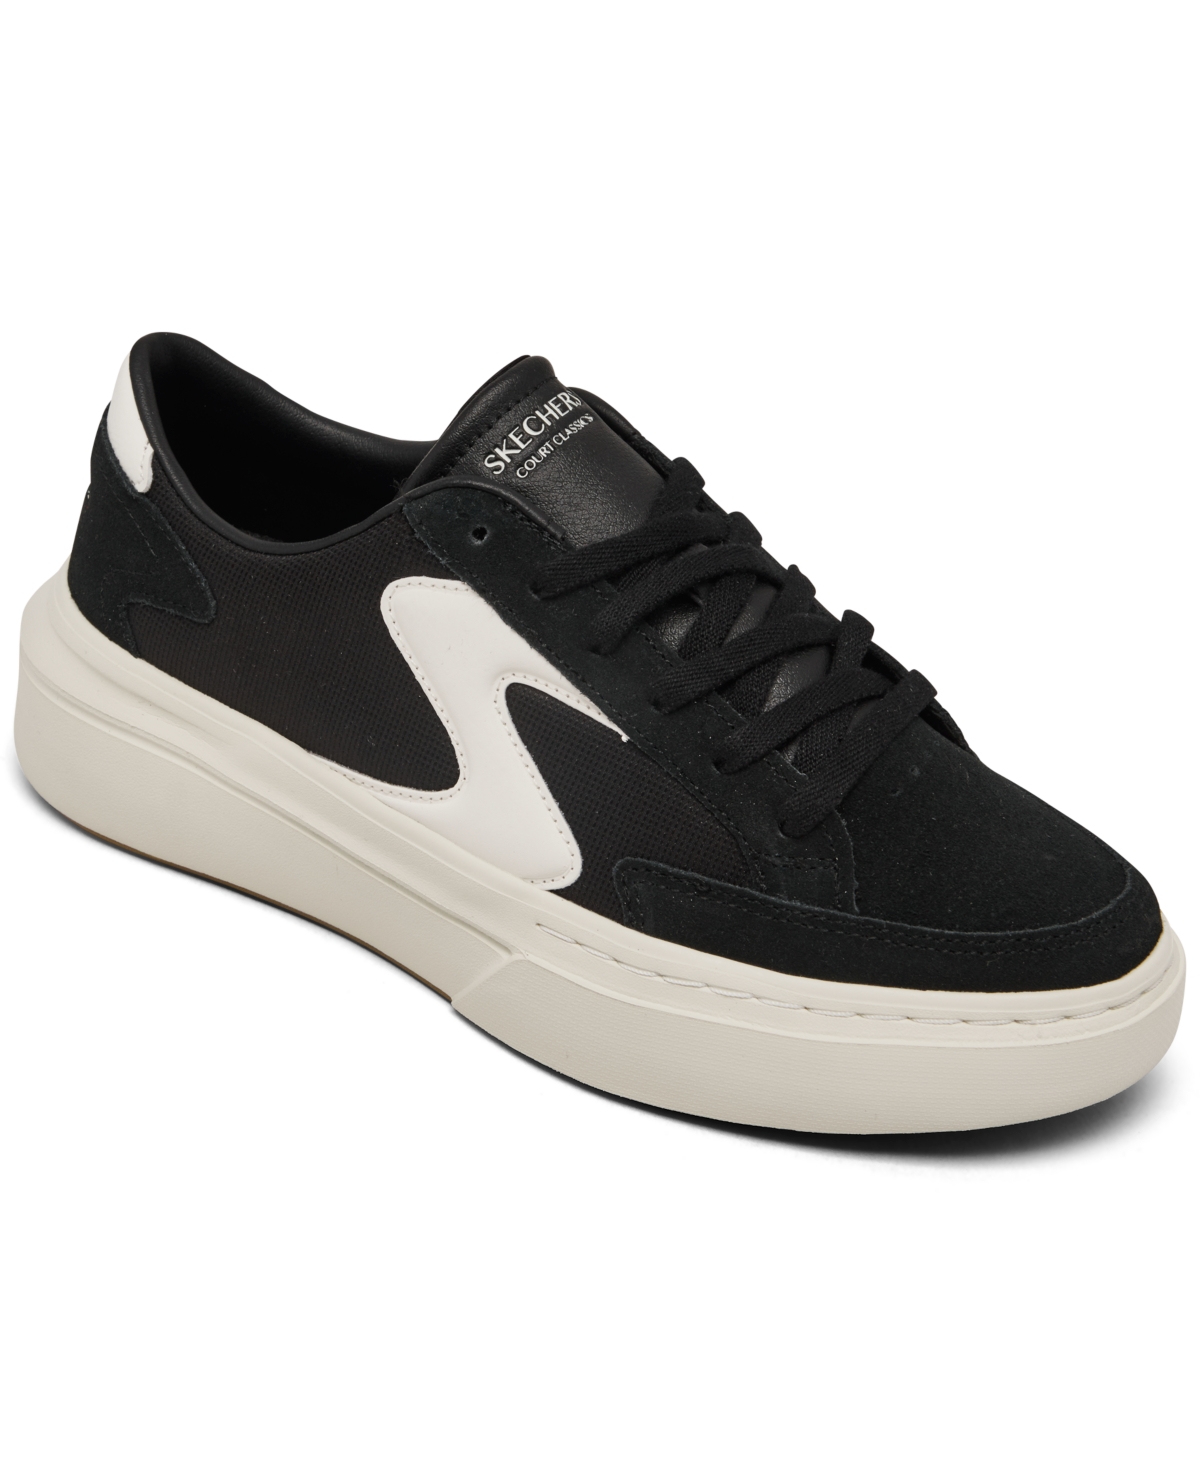 Women's Cordova Classic - Game Time Casual Sneakers from Finish Line - Black, Natural